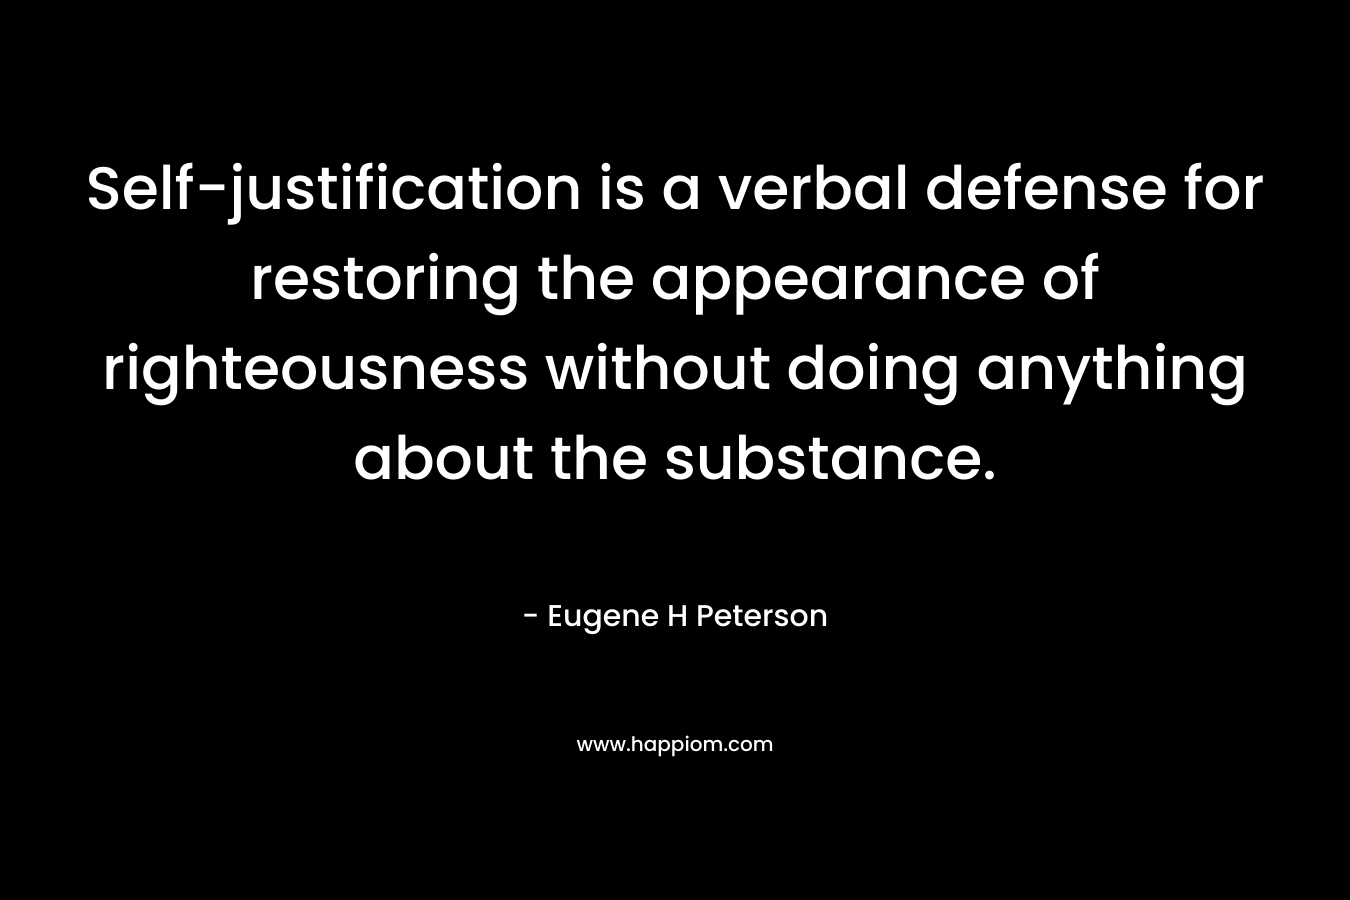 Self-justification is a verbal defense for restoring the appearance of righteousness without doing anything about the substance. – Eugene H Peterson